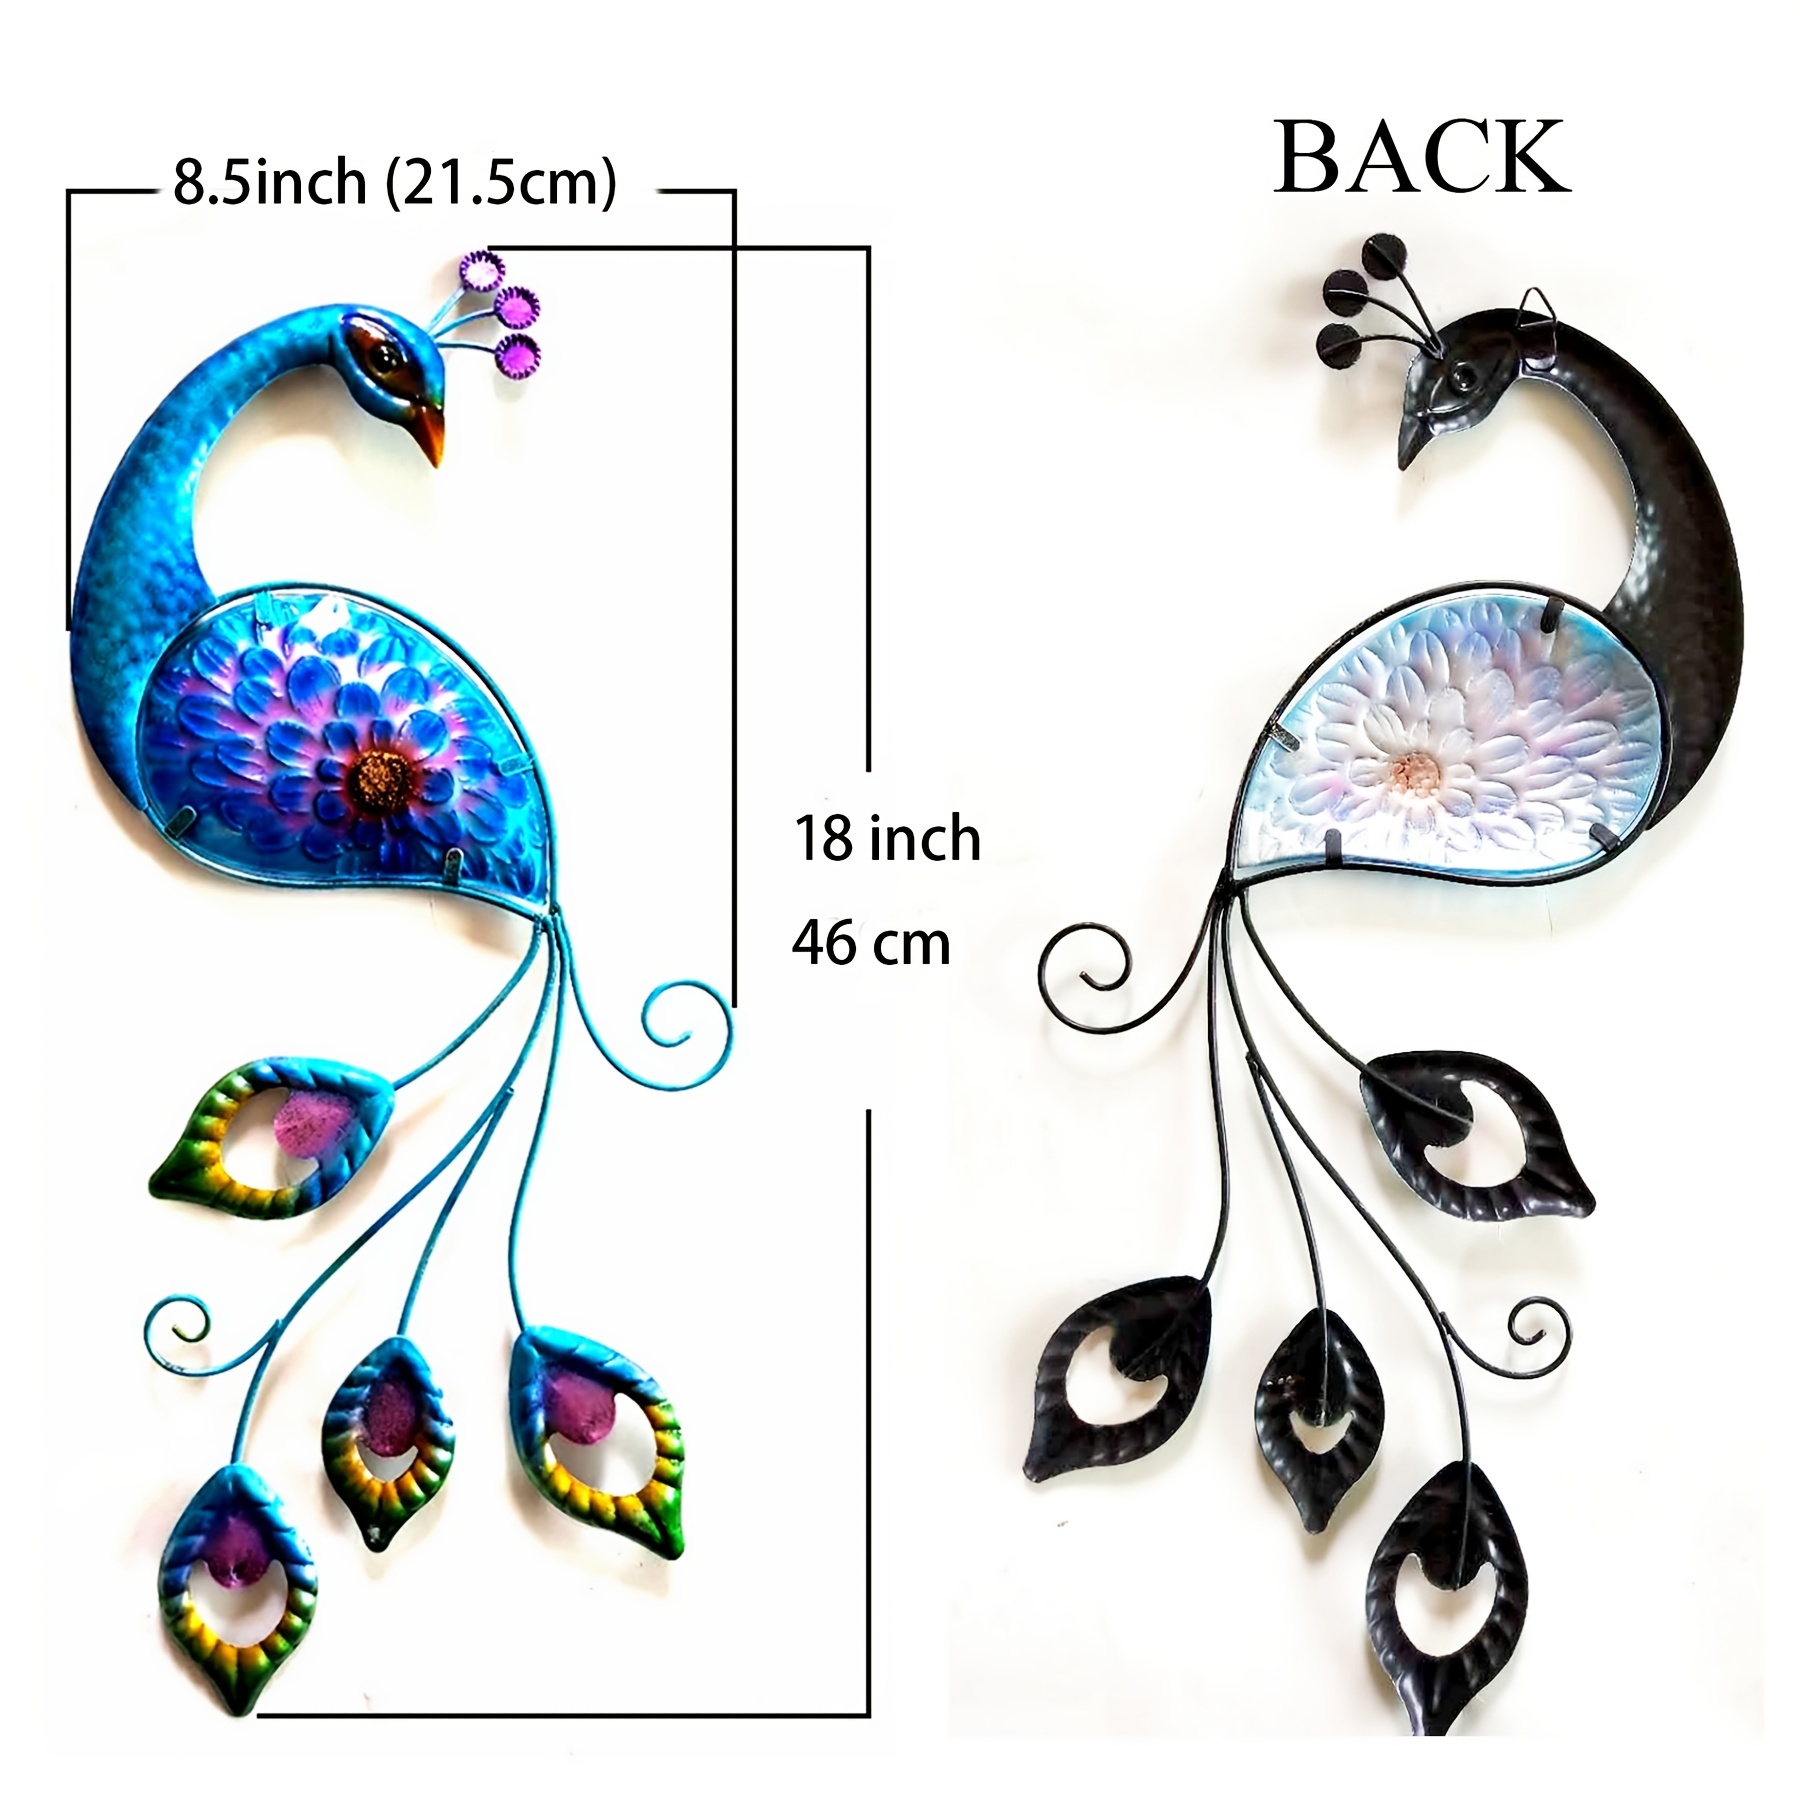 Gaura Art & Crafts Iron Painted Decorative Peacock Wall Decor 6 Hooks Home  Decor Office Hotel Room Wall Decor Items Gifts Items Key Stand : :  Home & Kitchen